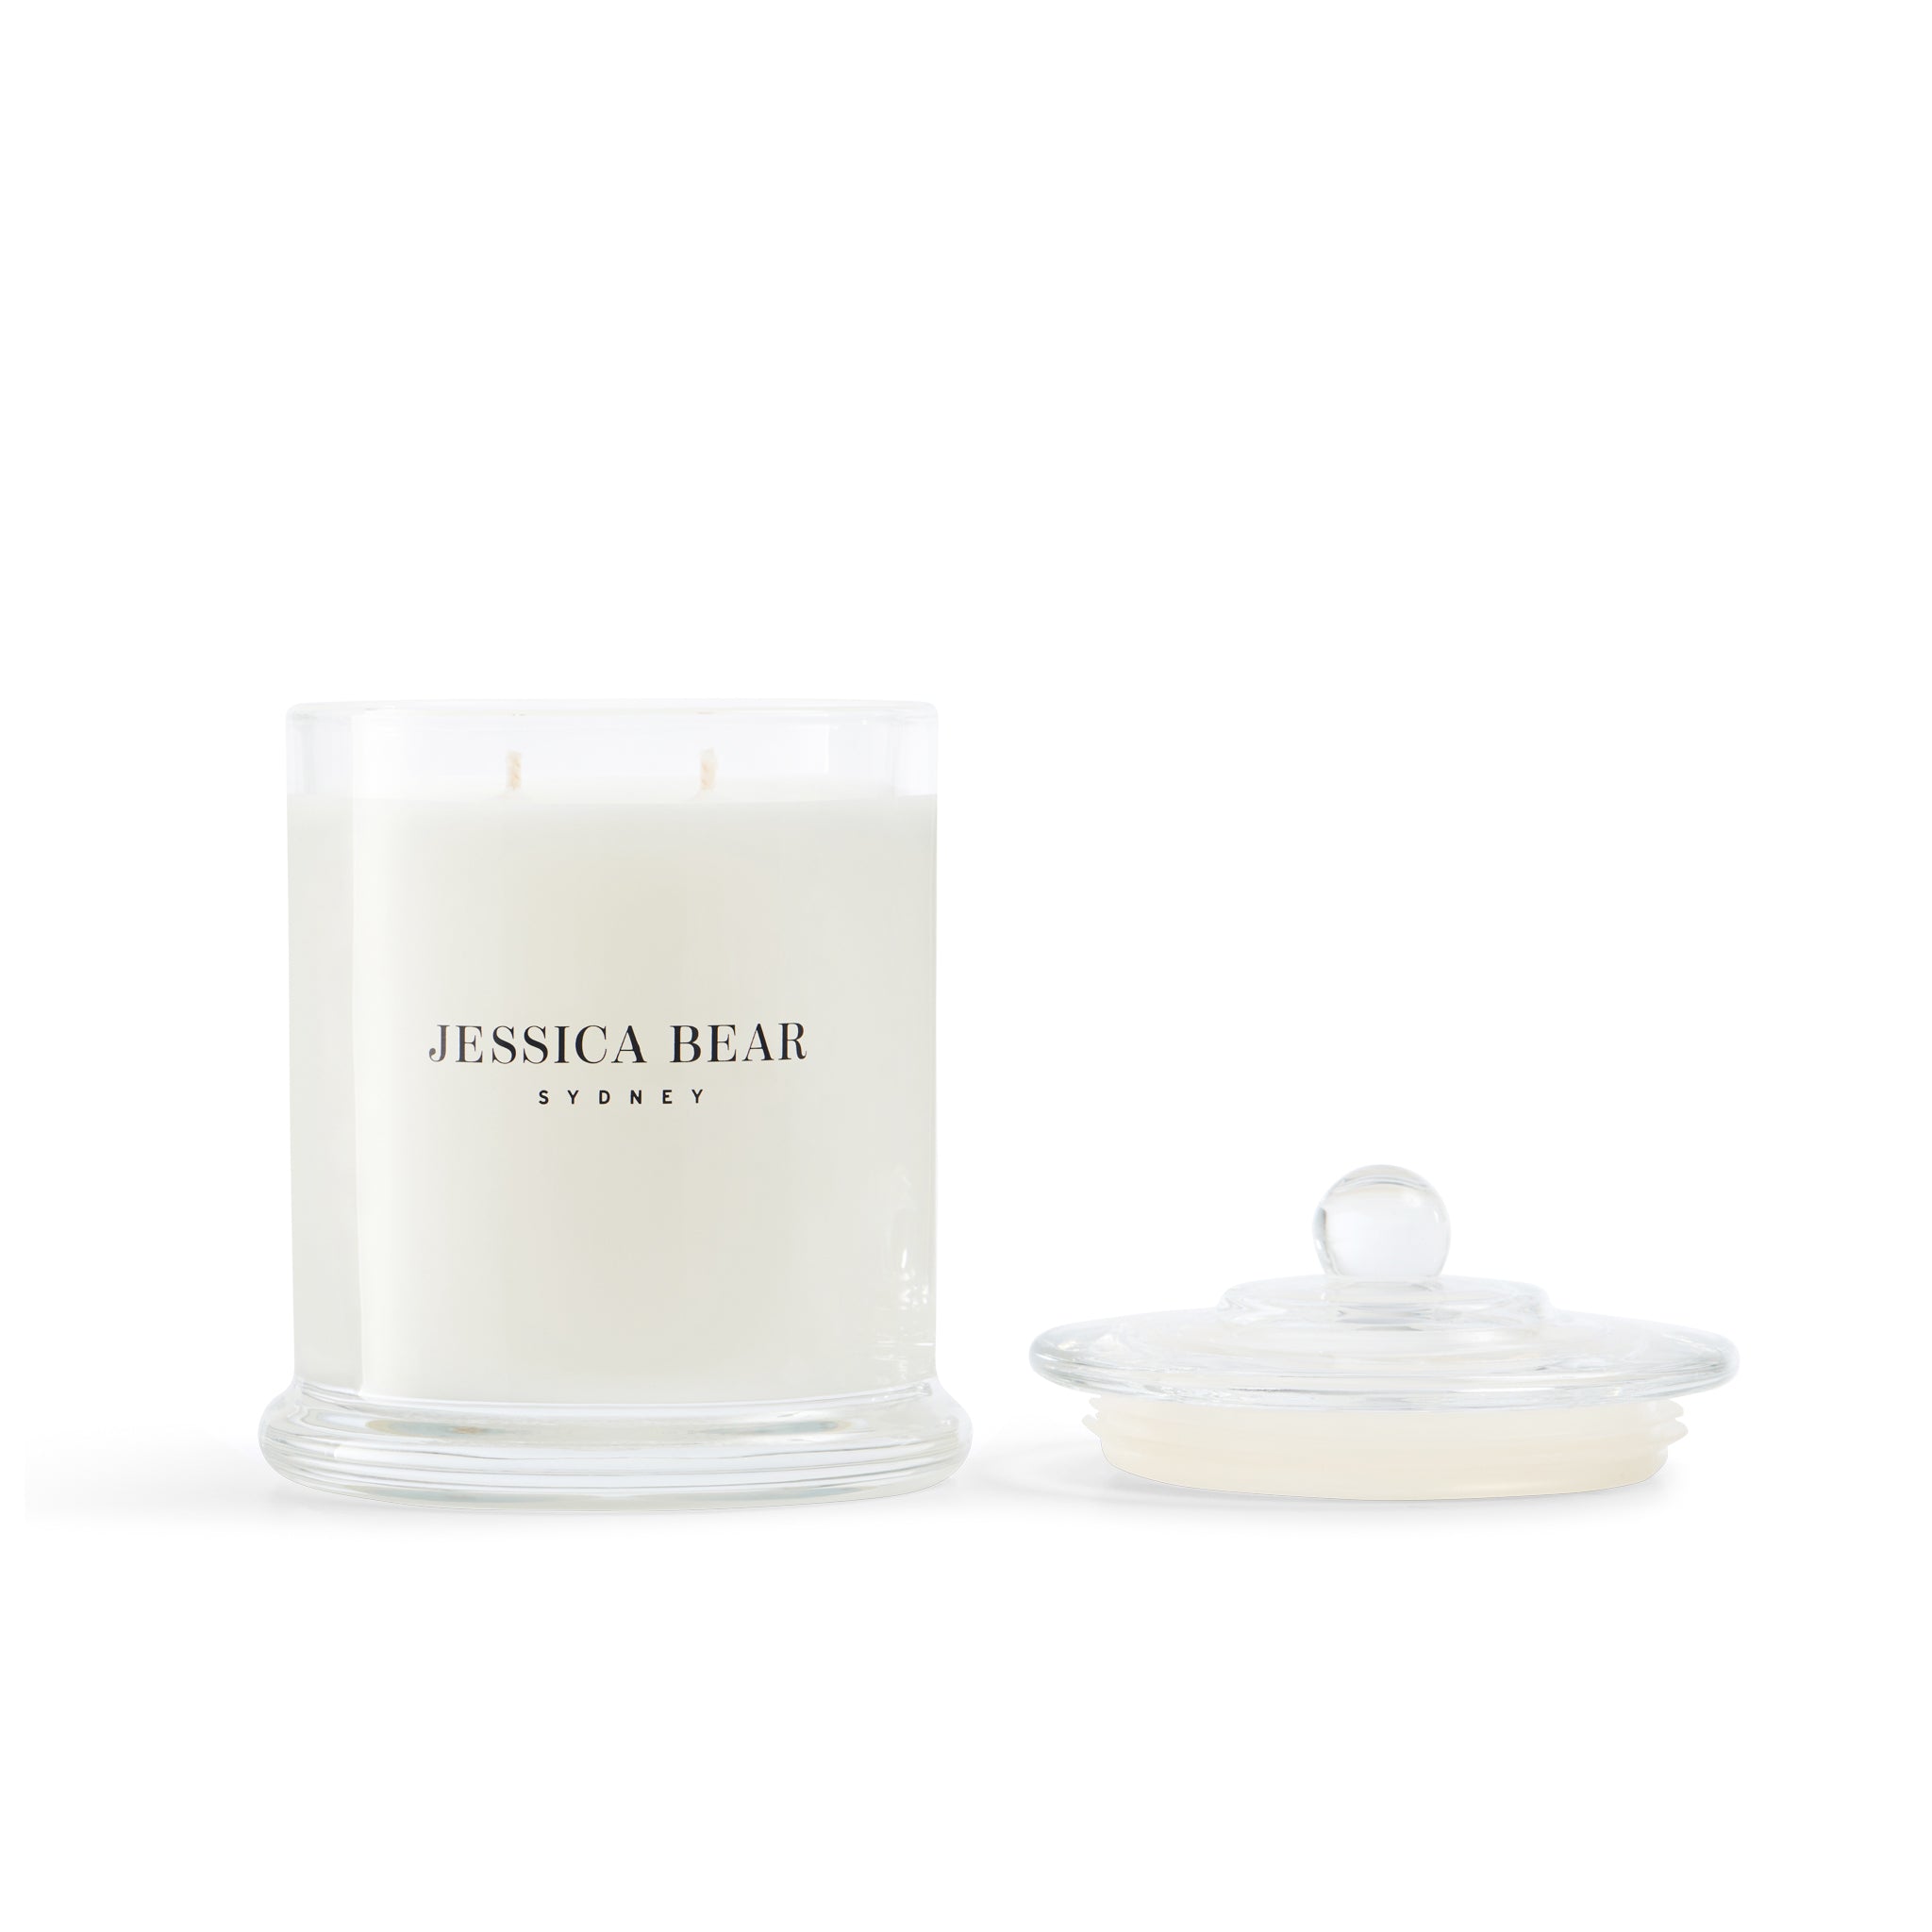 Amazon - 380g Scented Candle